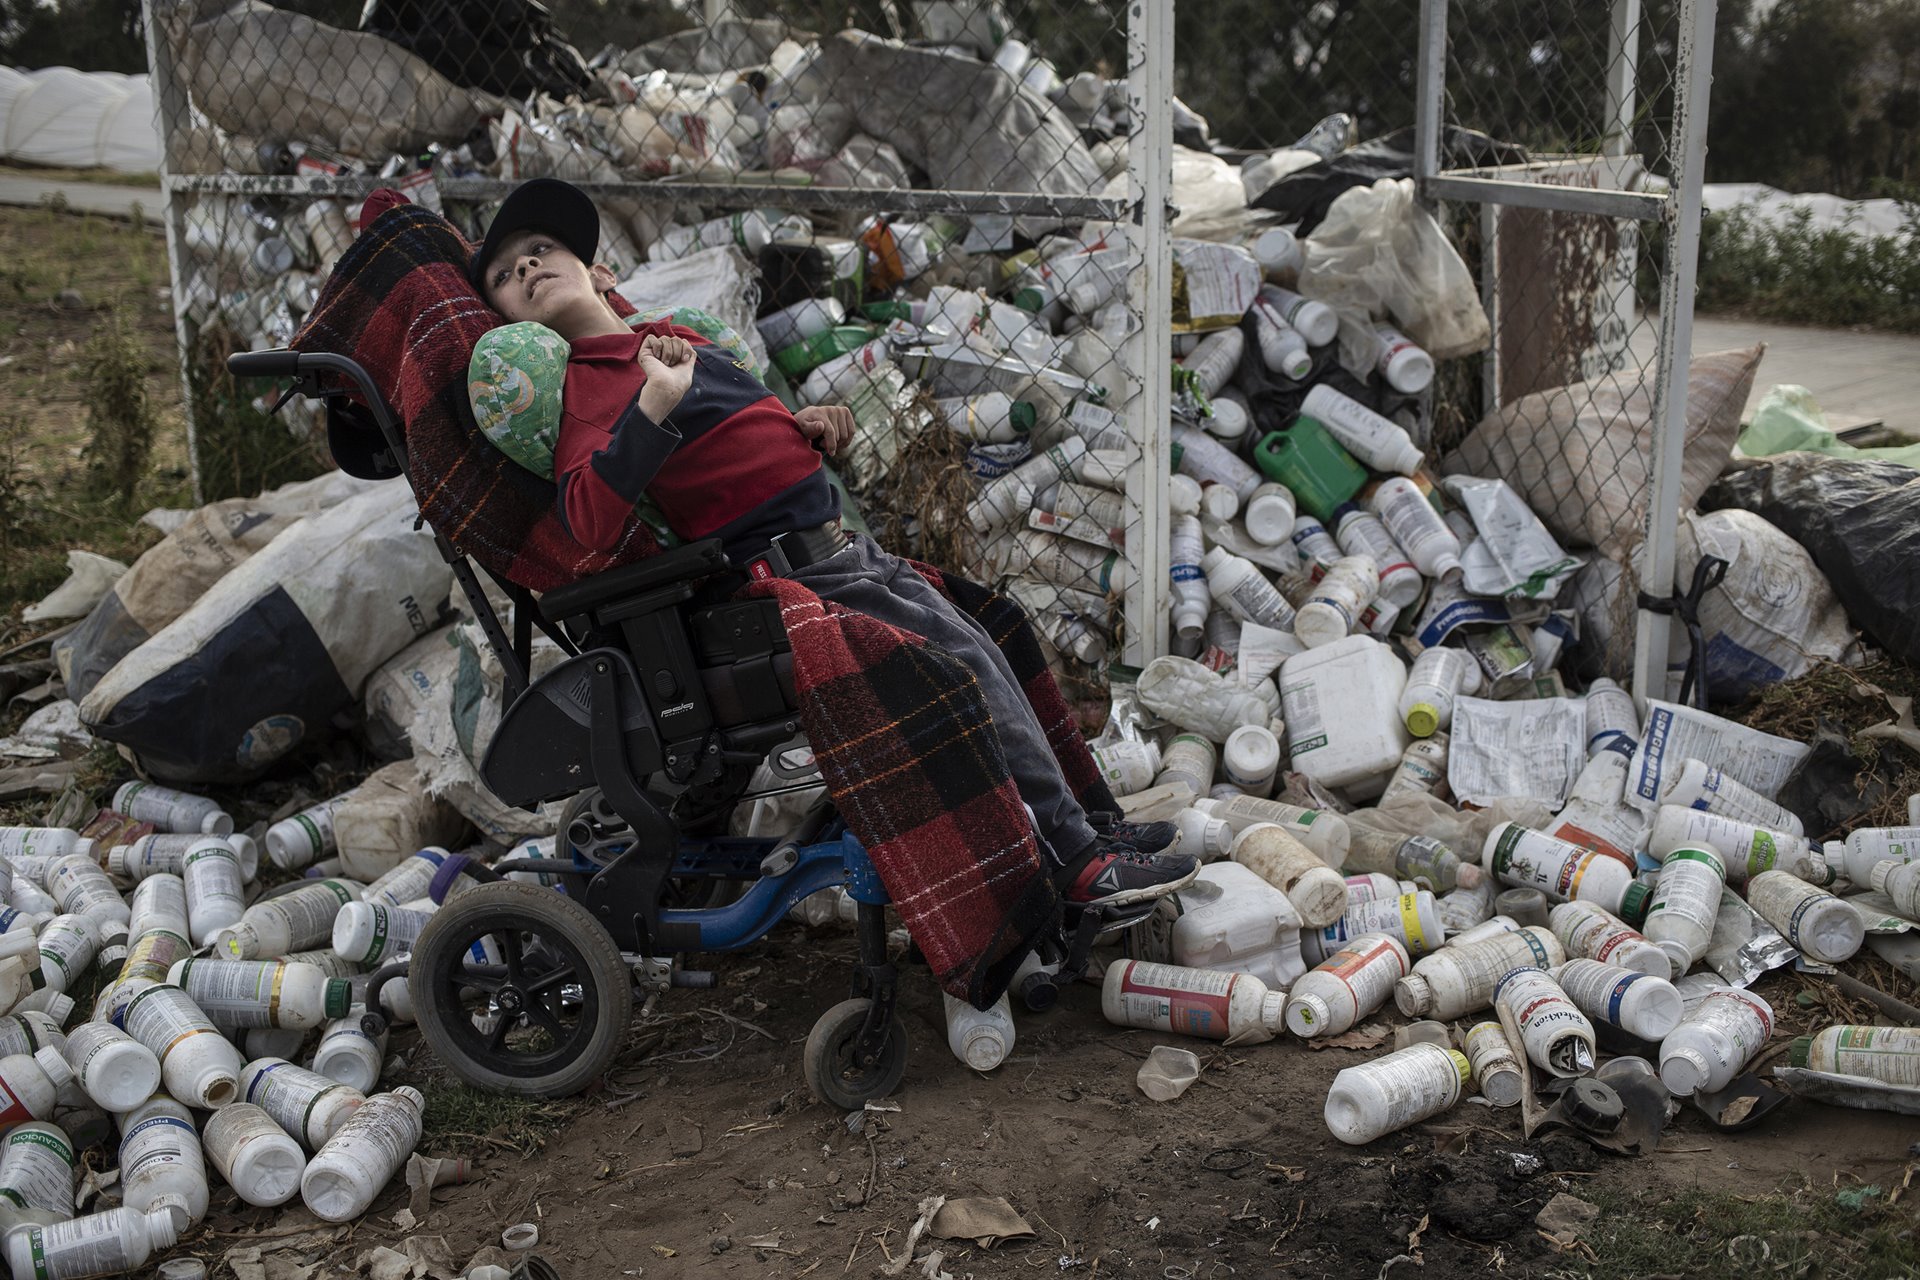 Sebastián (18), who lives with hydrocephalus (a neurological disorder caused by a build-up of fluids in cavities within the brain), waits in front of a garbage collection point for empty agrochemical containers, while on a walk near home with his father, in Villa Guerrero, Mexico. Such collection cages are also in use in other parts of the world. Authorities in the US and Australia recommend triple-rinsing of containers before disposal in this manner.